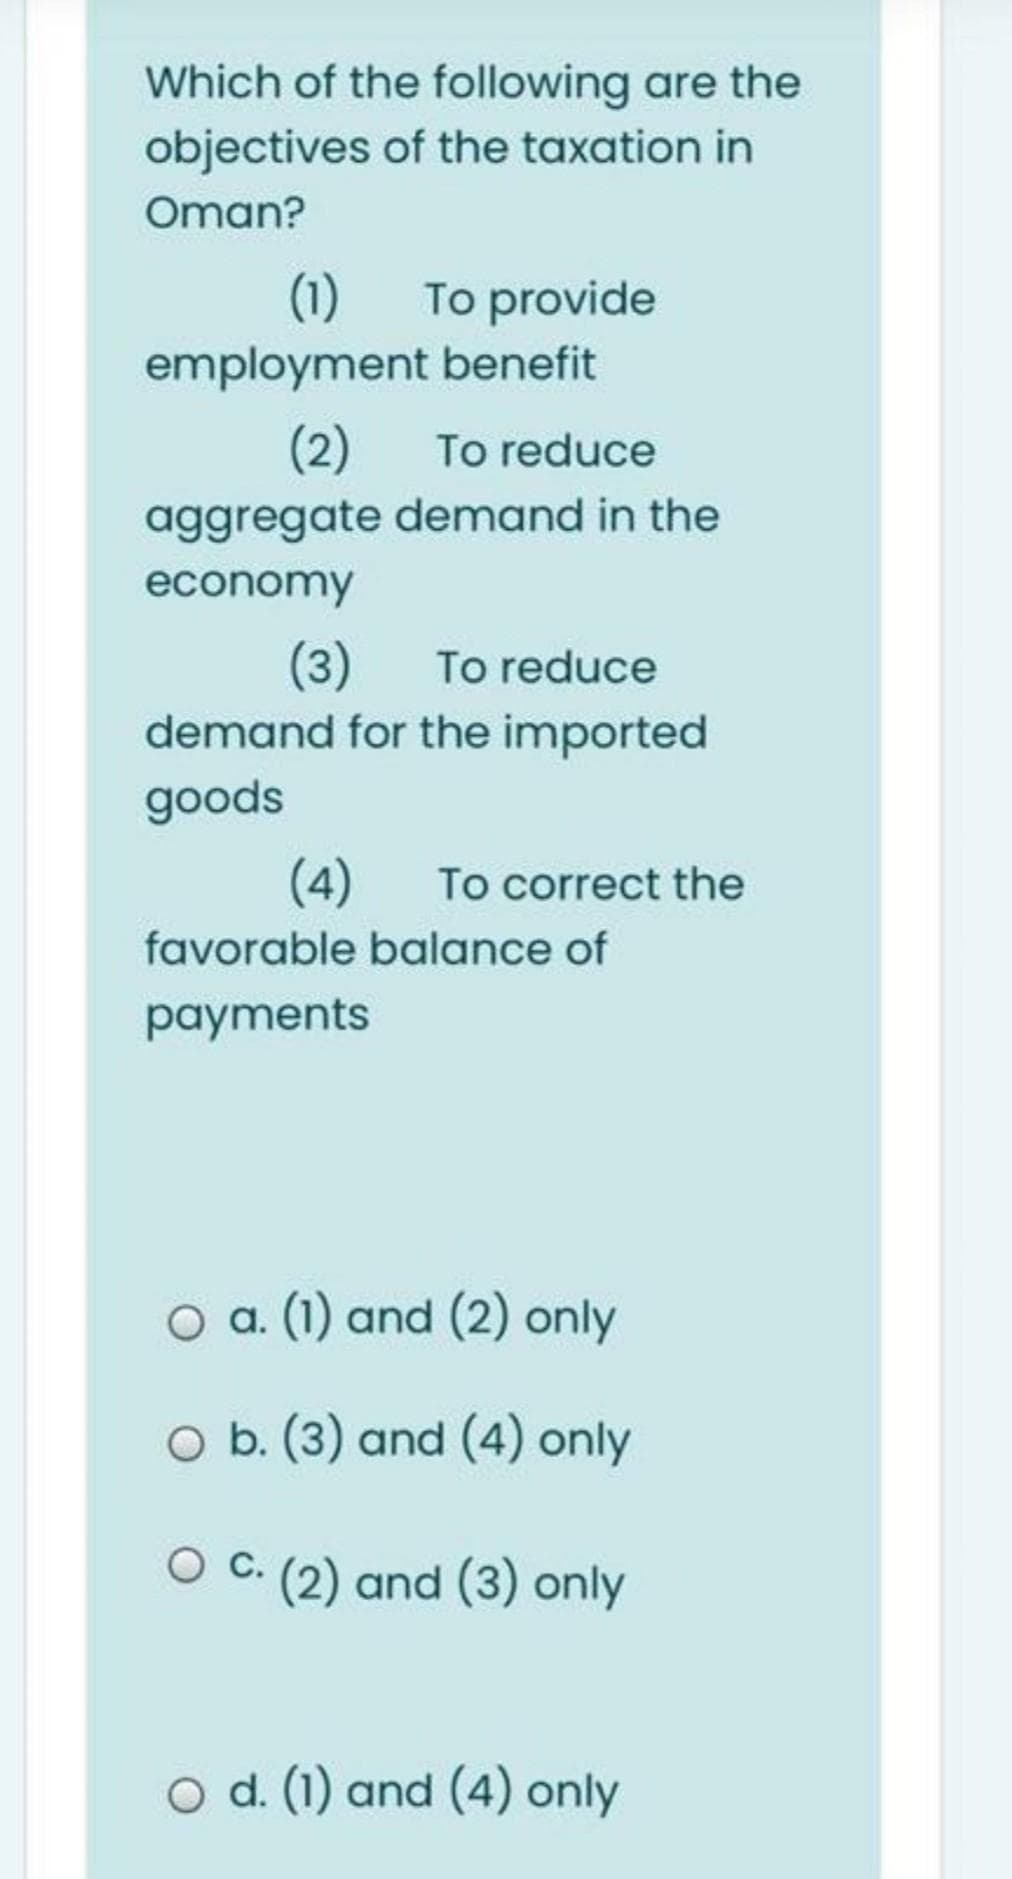 Which of the following are the
objectives of the taxation in
Oman?
(1)
To provide
employment benefit
(2)
To reduce
aggregate demand in the
economy
(3)
demand for the imported
To reduce
goods
(4)
To correct the
favorable balance of
раayments
O a. (1) and (2) only
O b. (3) and (4) only
C. (2) and (3) only
O d. (1) and (4) only
